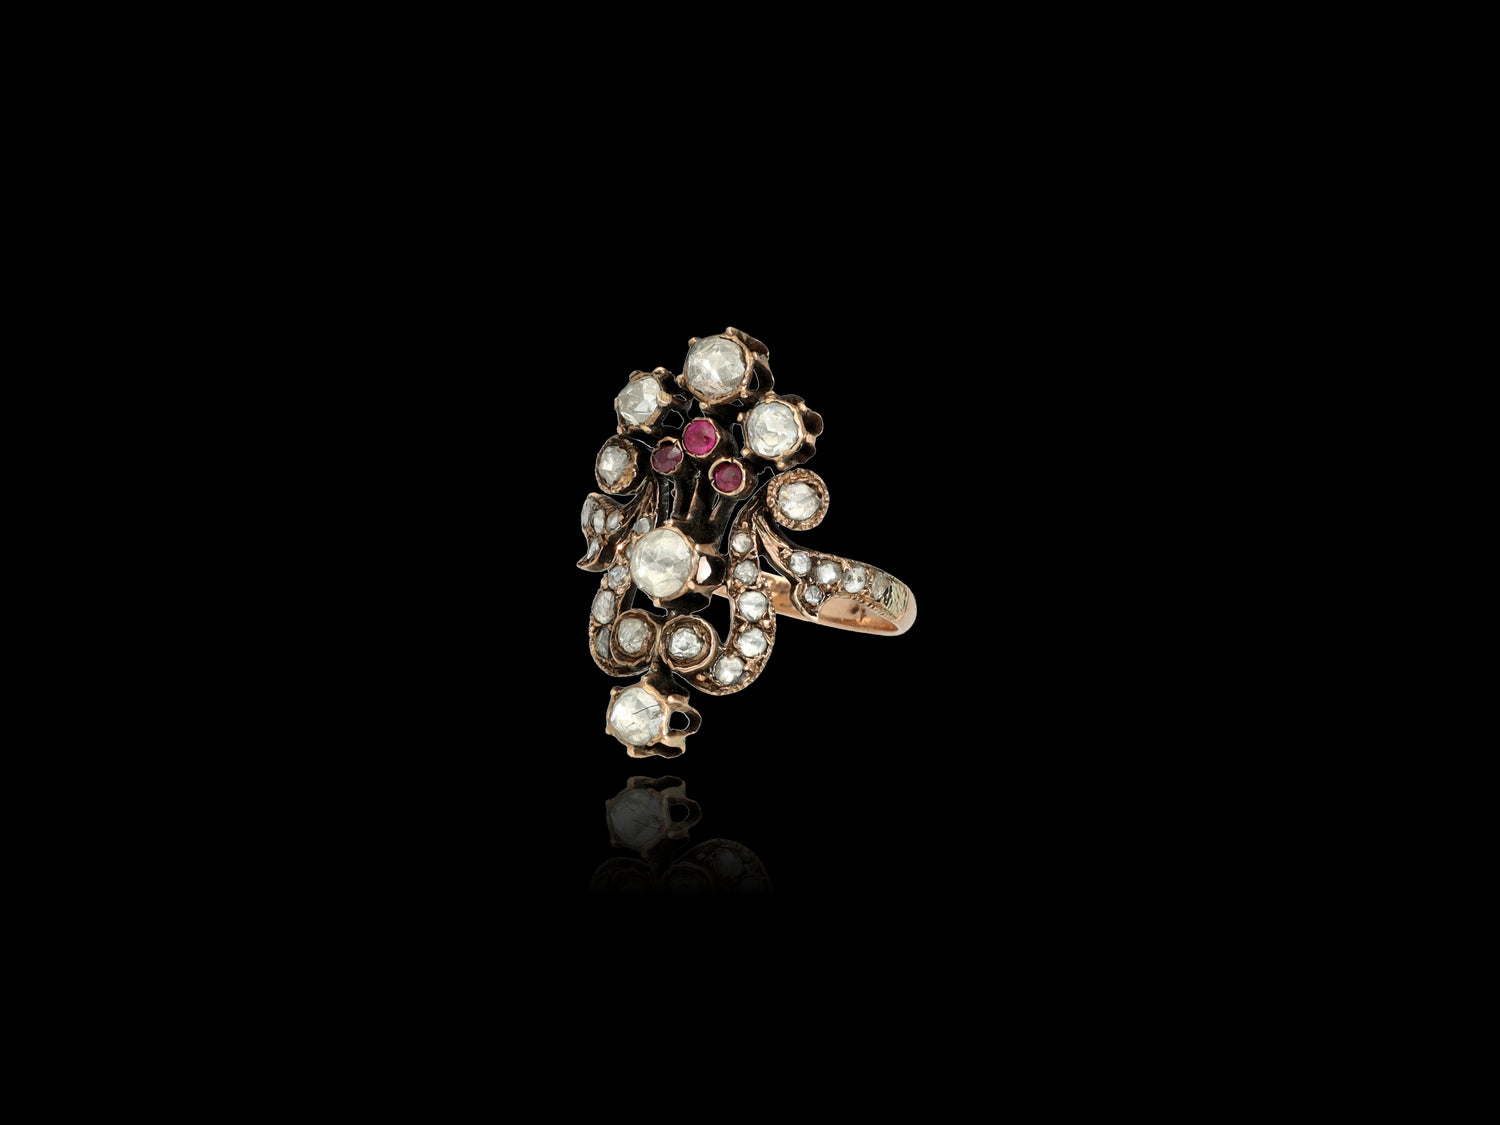  A statement ring that evokes the spirit of romance, this antique beauty features 29 old Rose-cut diamonds forming a lovely flower bouquet along with three 0.05 CT natural rubies. The diamonds are preserved in a superb state with larger 7 stones.